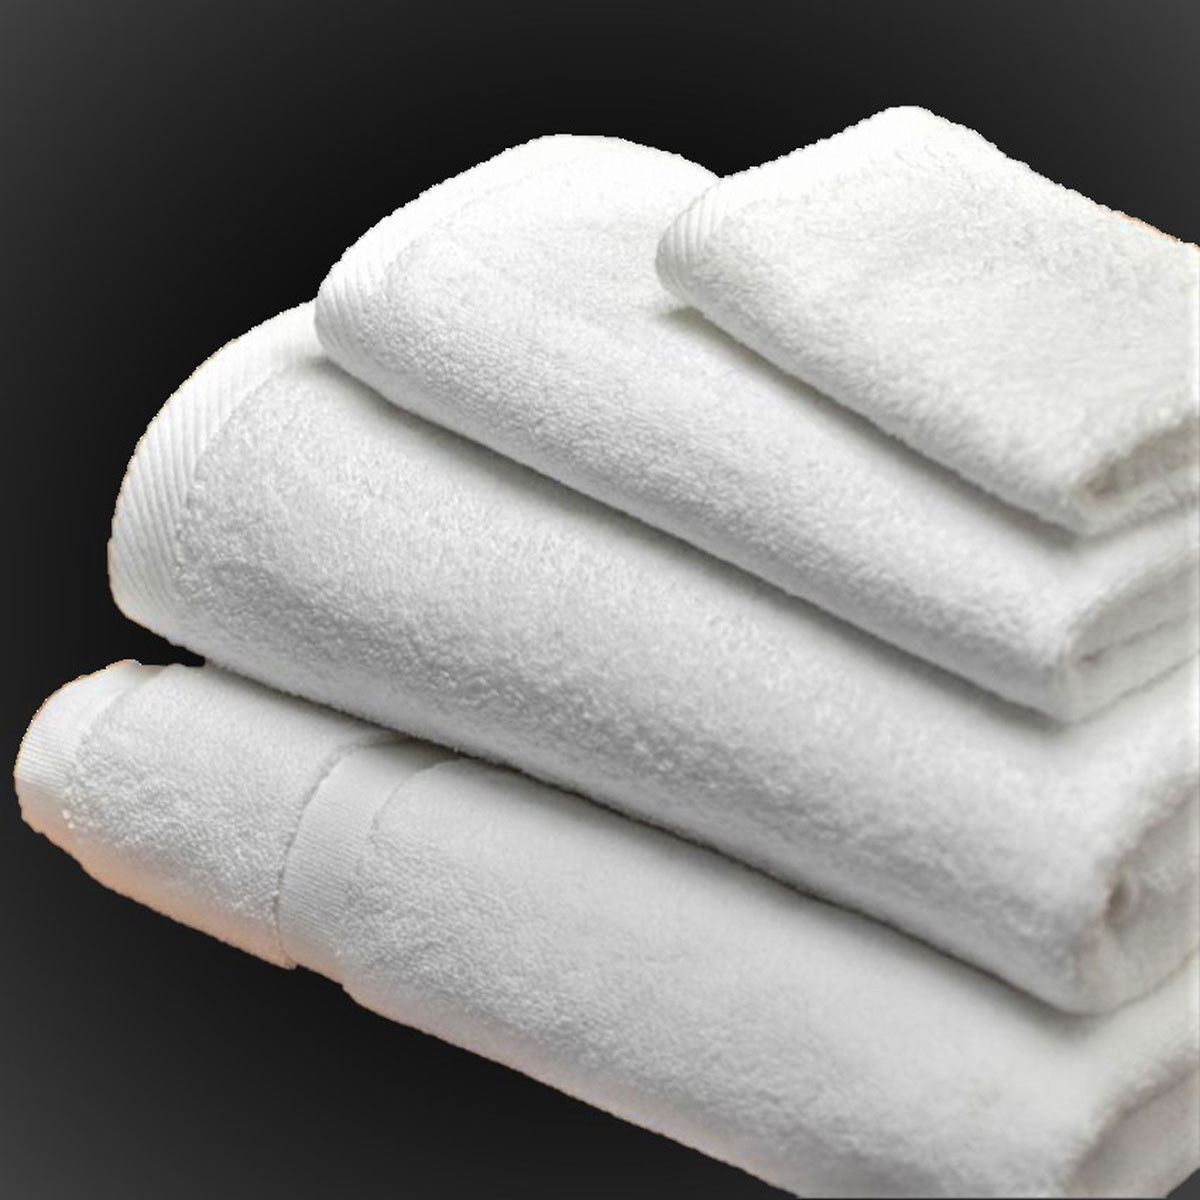 Are golden mills towels suitable for commercial properties?